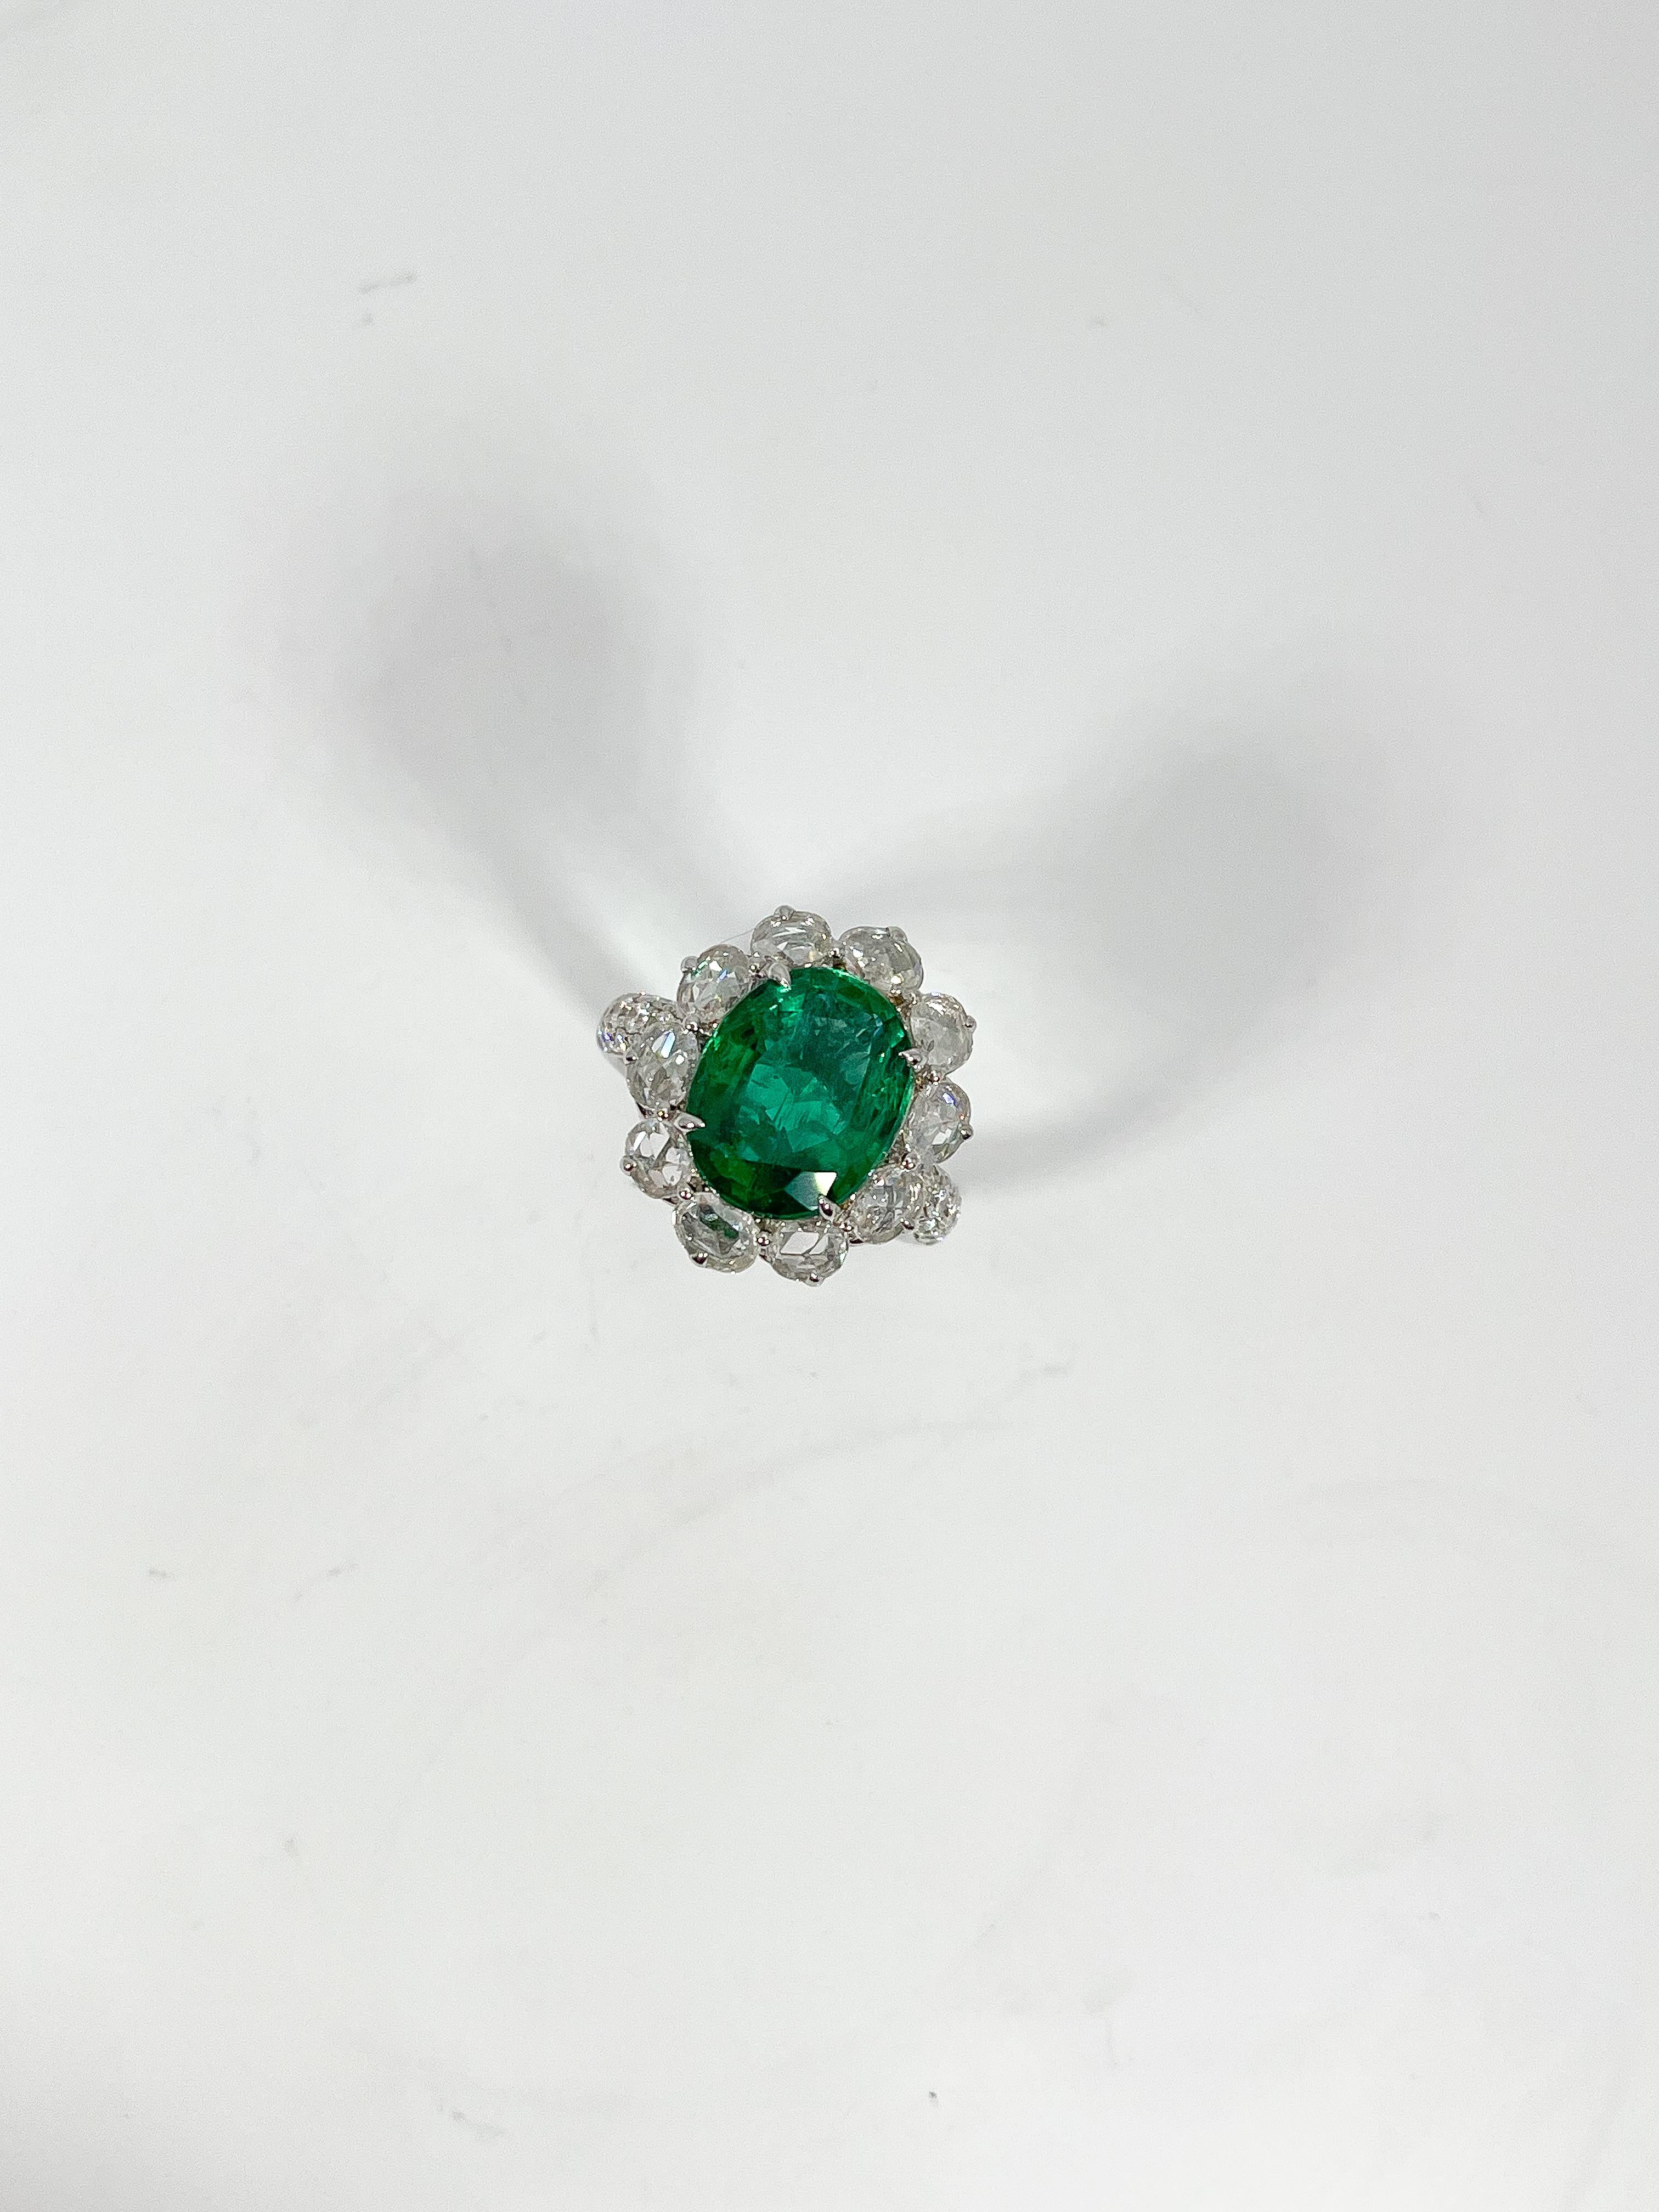 Ladies size 7 18k white gold ring prong and bead set with an oval cut emerald, oval shaped rose cut diamonds and round brilliant cut diamonds. Total item weight is 8.2 grams. Comes with AJI certification.
Emerald Attributes:
Shape and Cut- Oval